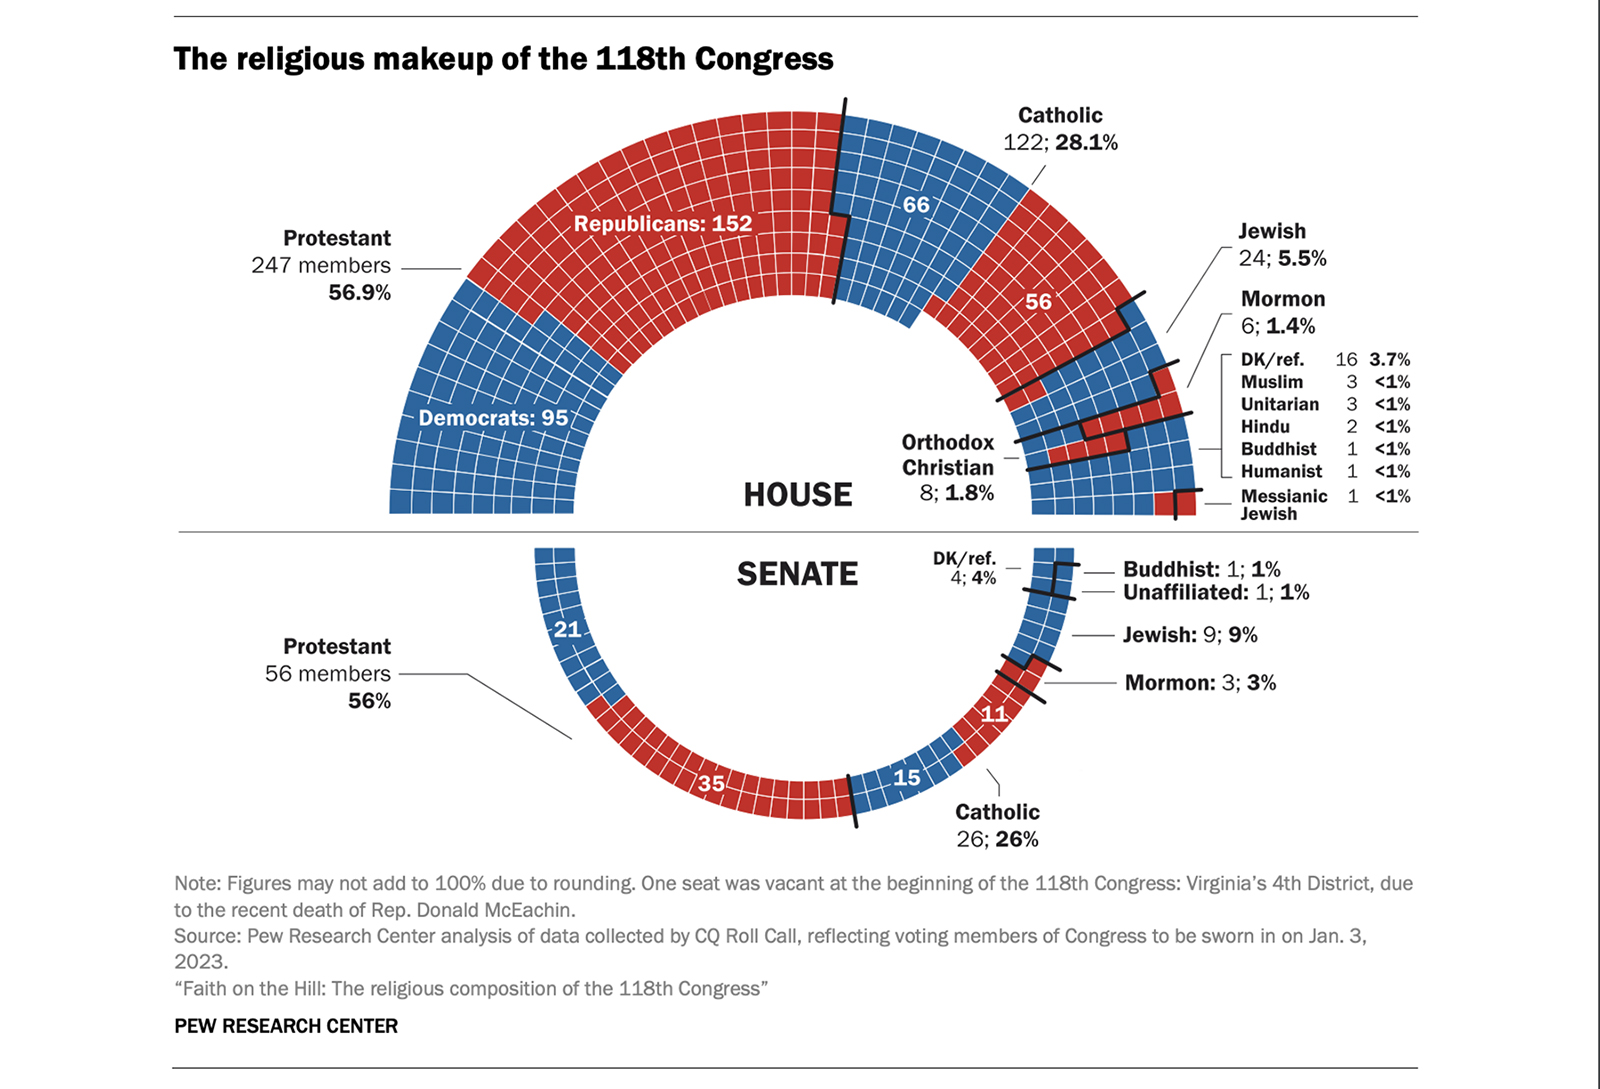 "The religious makeup of the 118th Congress" Graphic courtesy of Pew Research Center